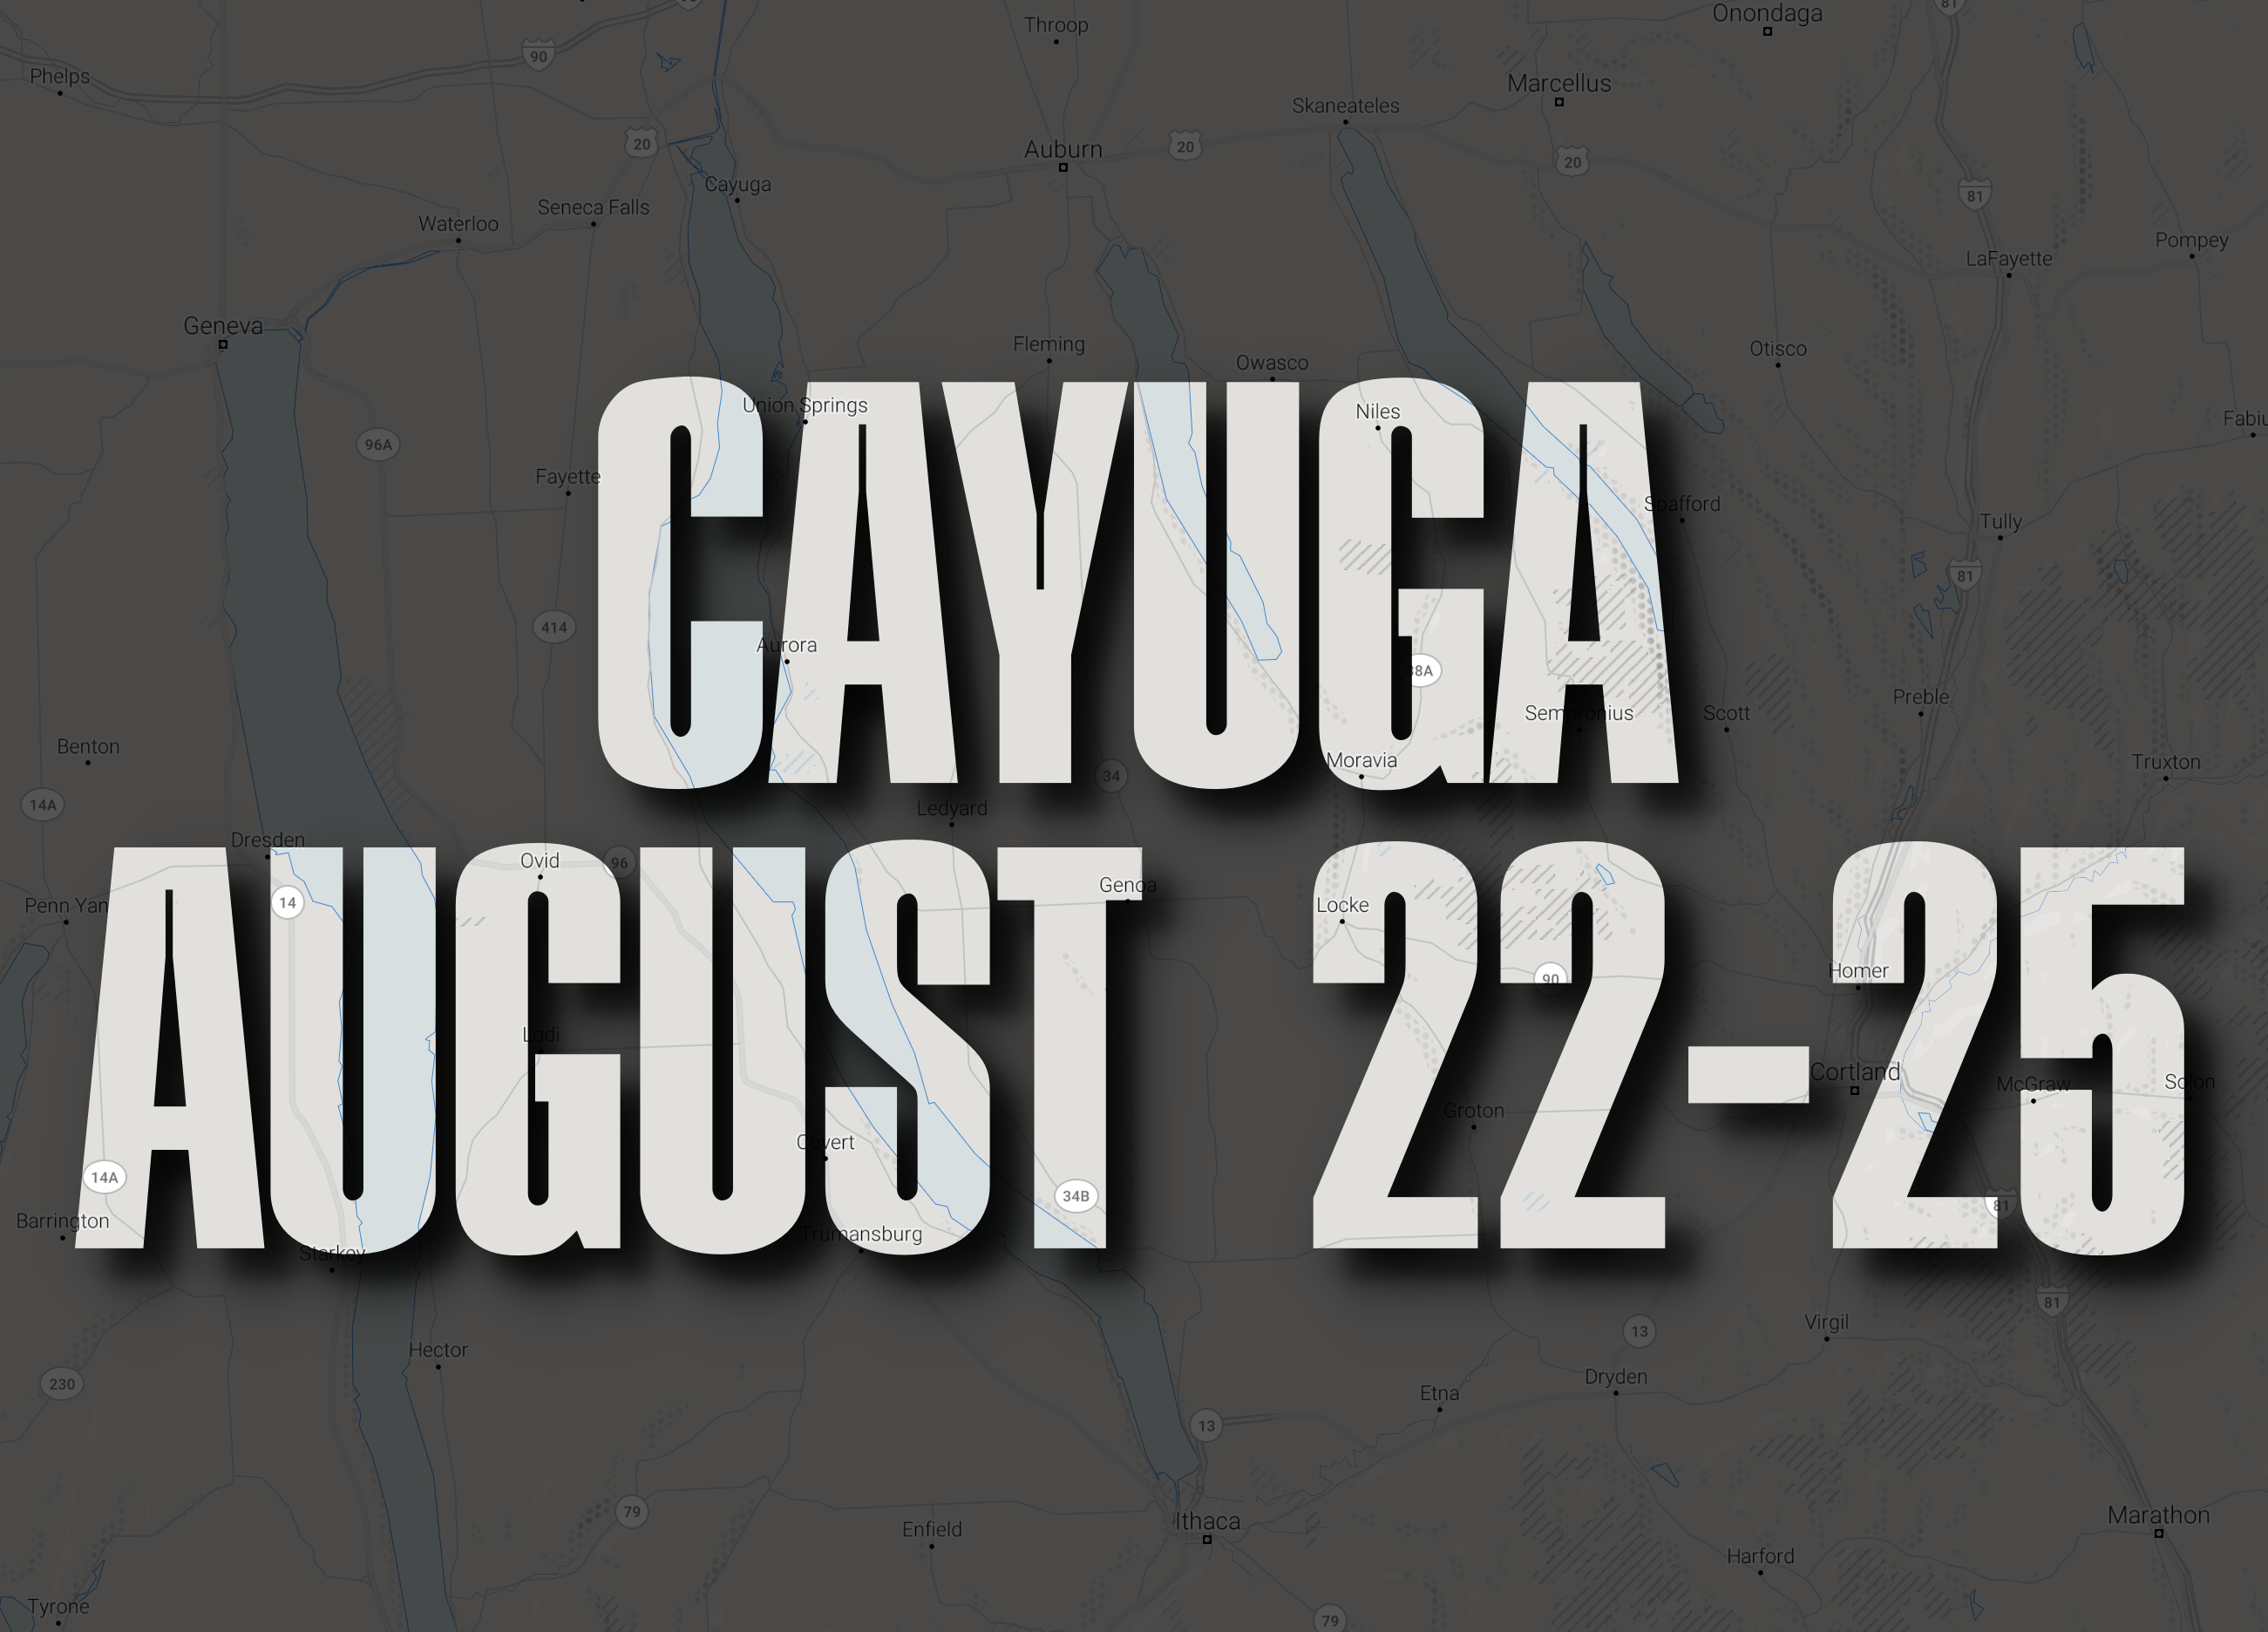 The final event of the 2019 Elite regular season will be held on New Yorkâs Lake Cayuga out of Union Springs, Aug. 22-25. At 40 miles long, Cayuga is the longest of New Yorkâs Finger Lakes and is the second largest by surface area at 42,000 acres.
